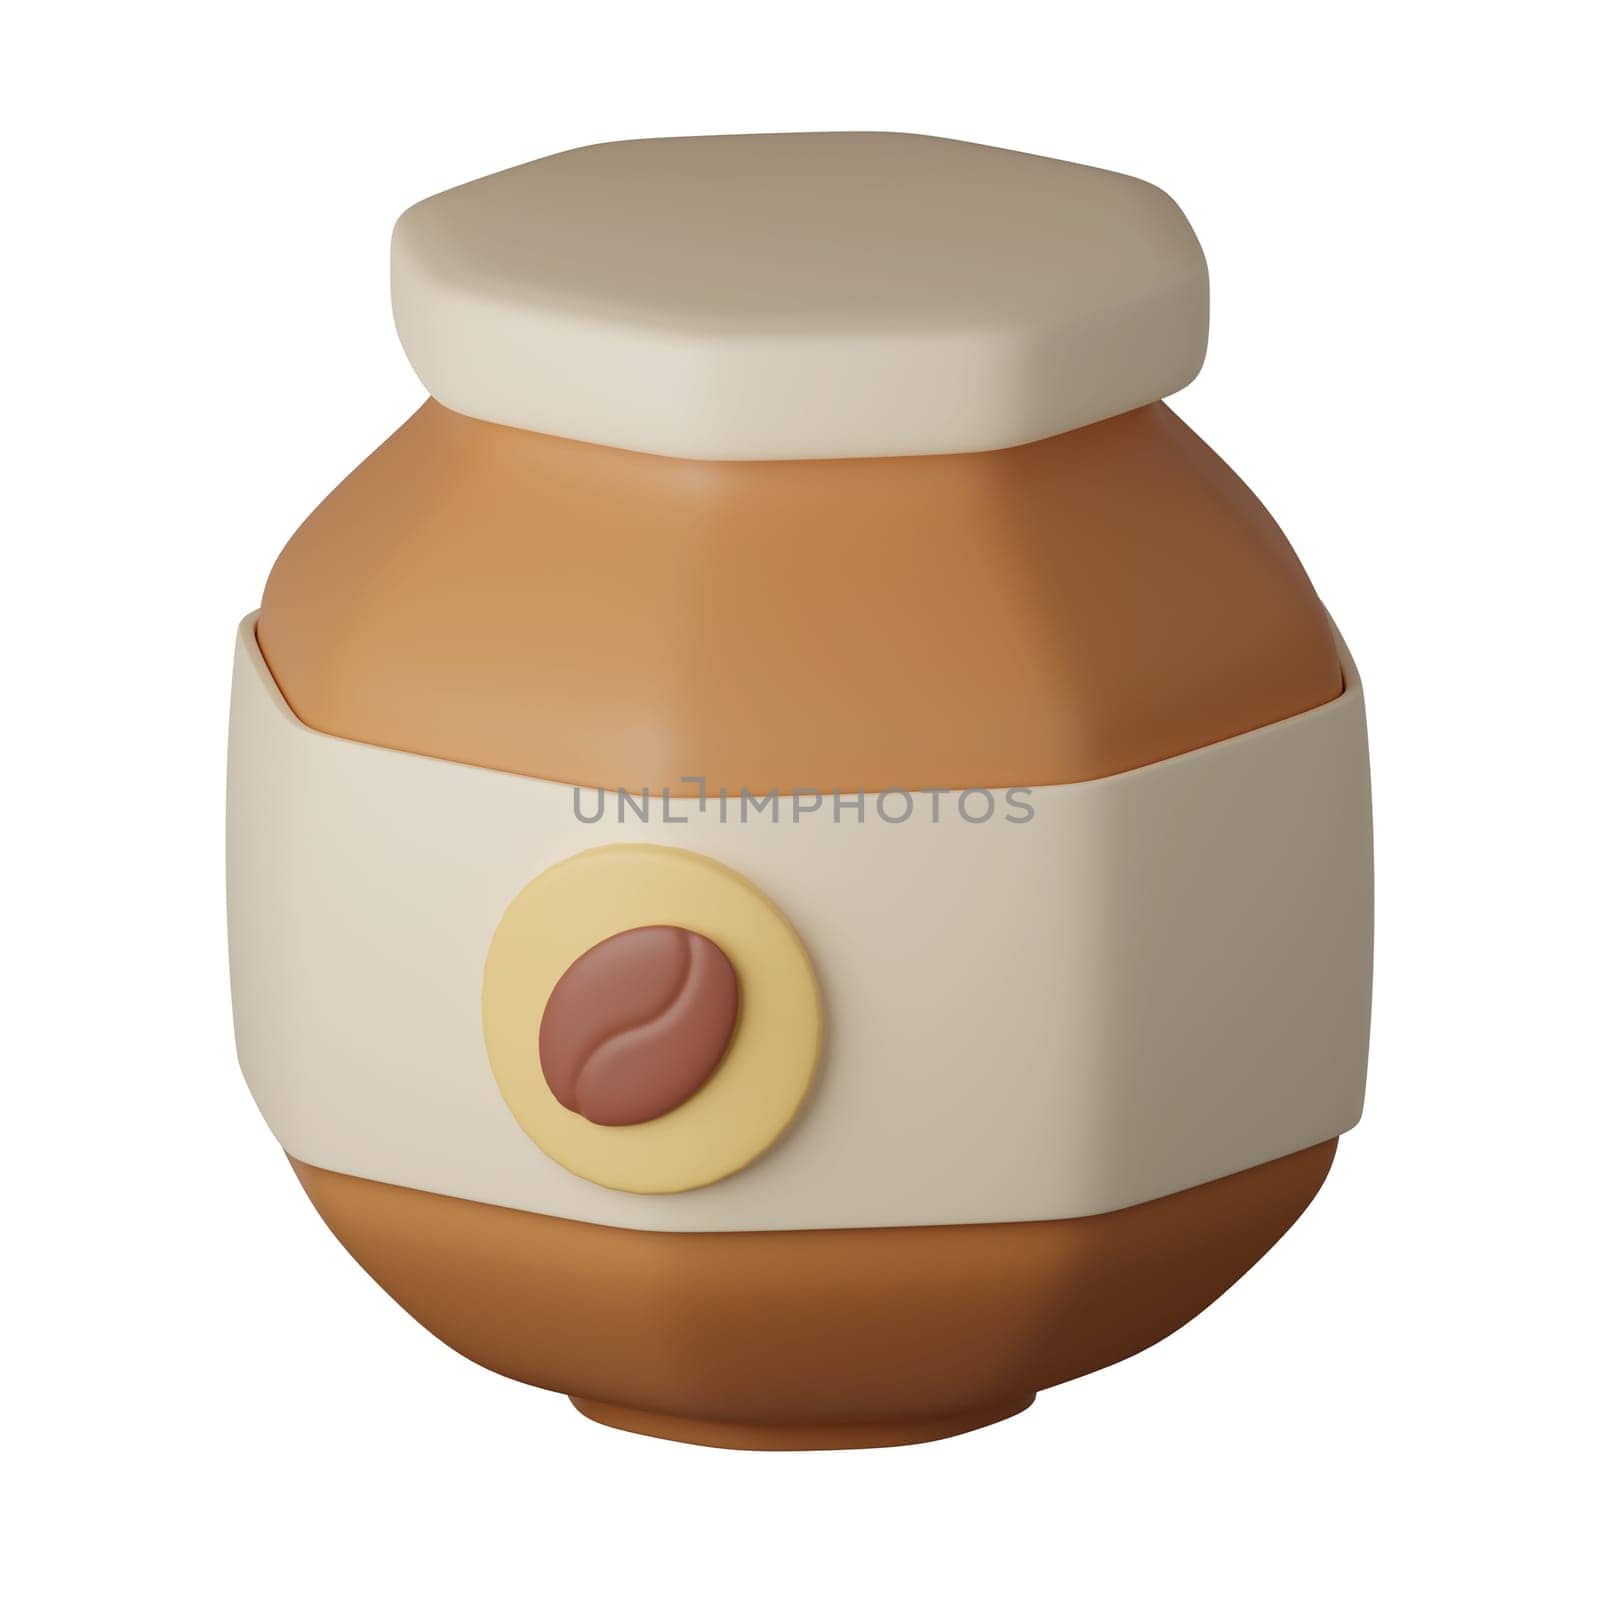 A bottle of Ground coffee Cartoon Style Isolated on a White Background. 3d illustration.